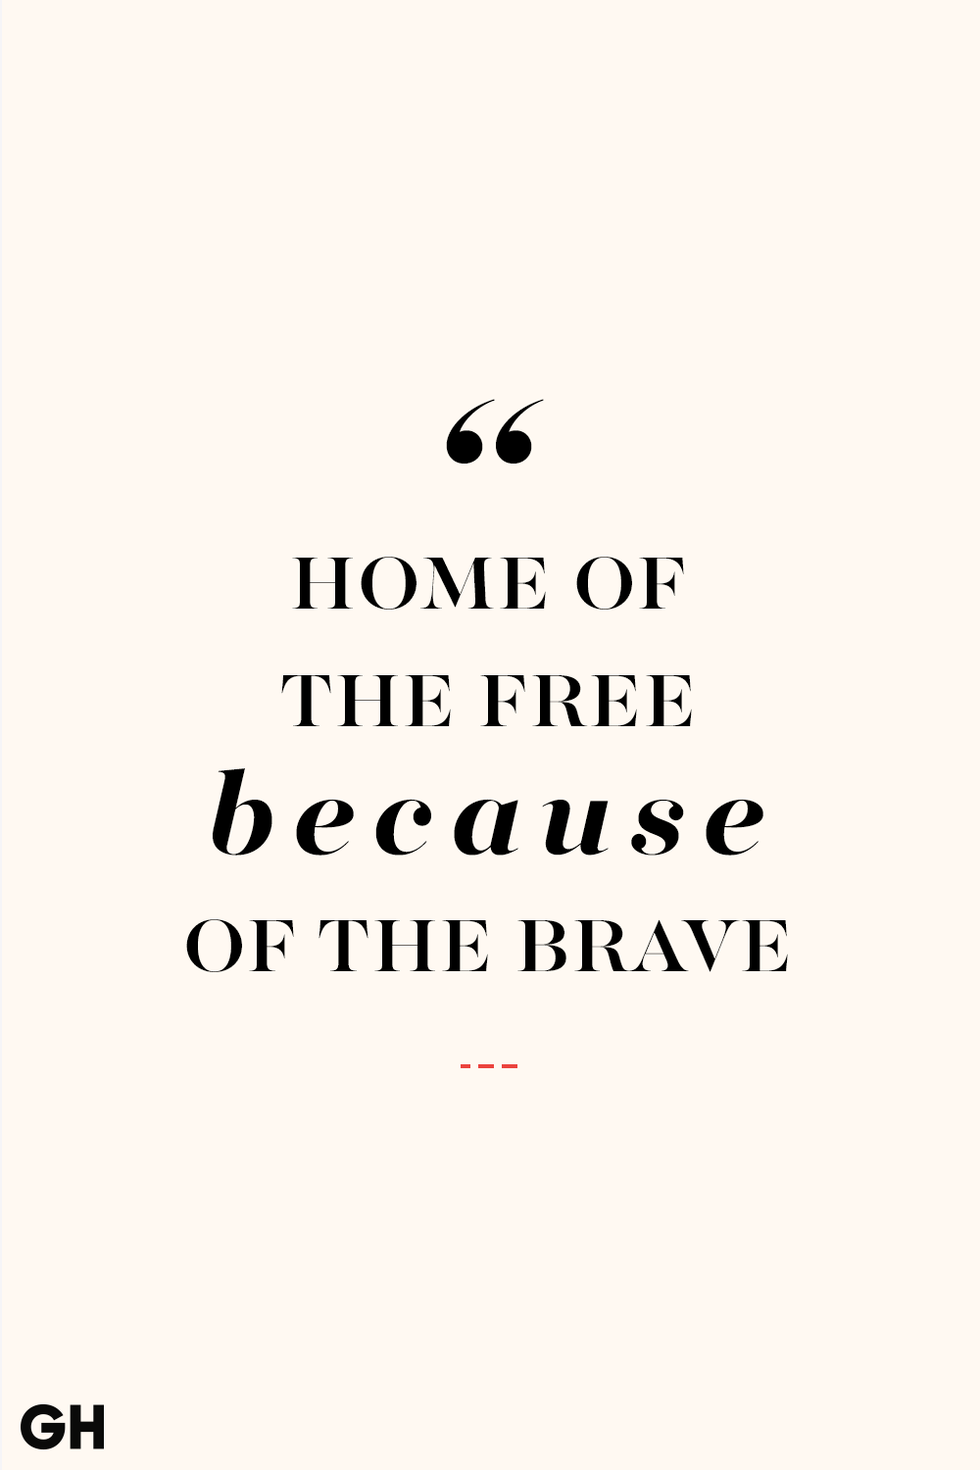 25+ Best Memorial Day Quotes 2021 – Beautiful Sayings That Honor